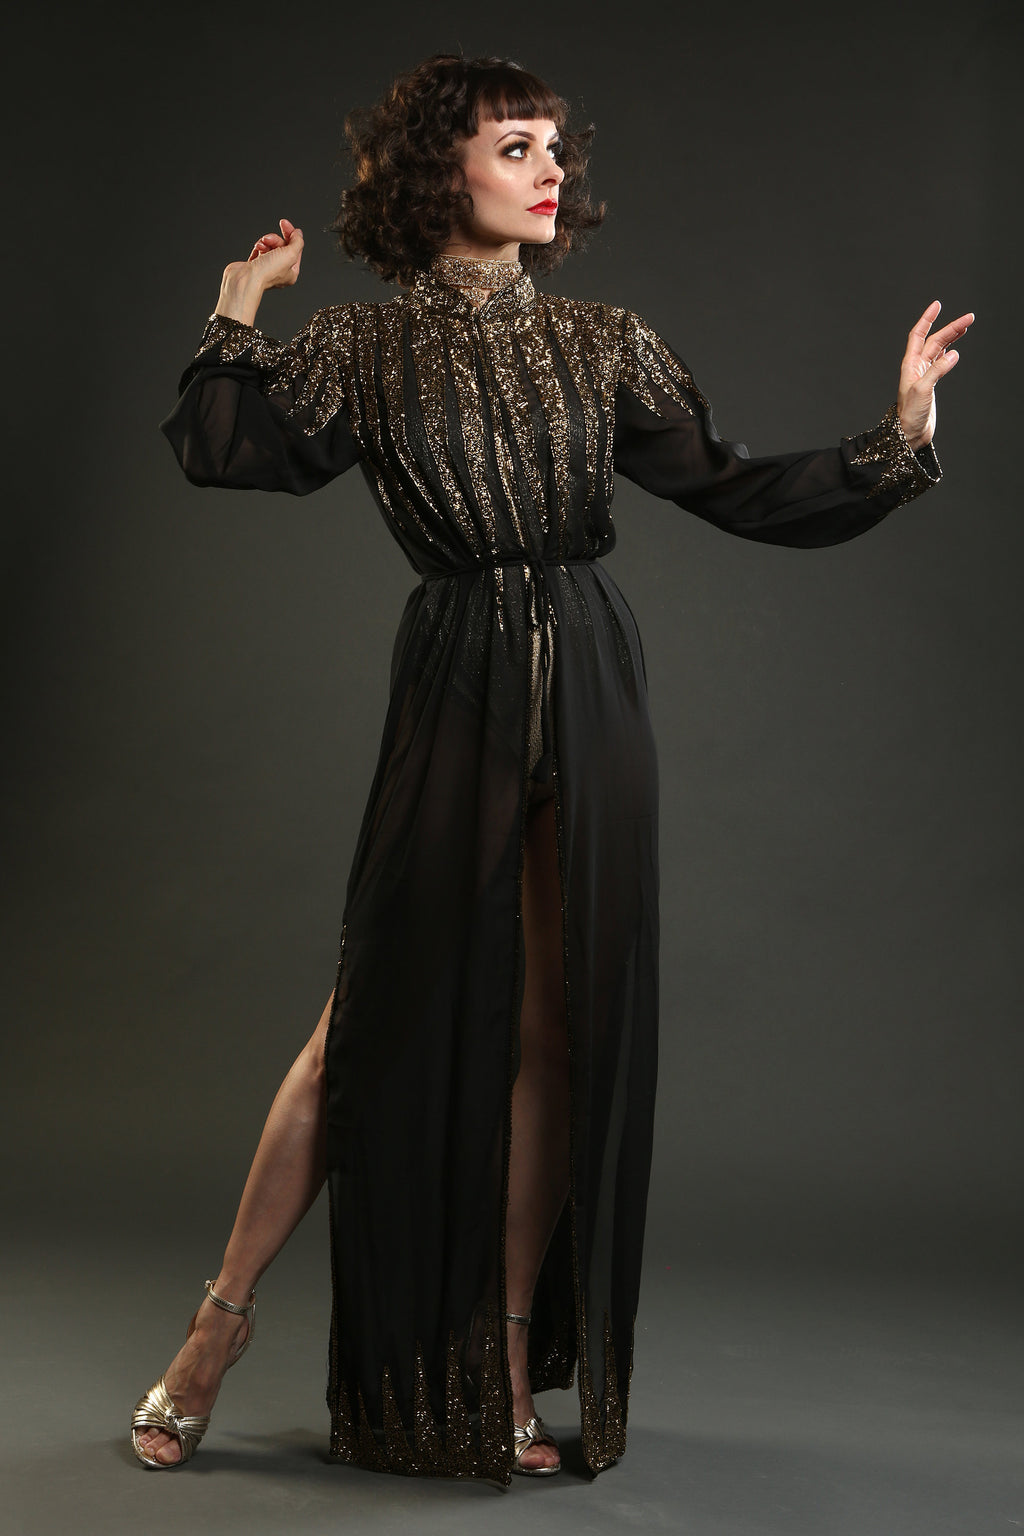 Black Embellished Gown Overcoat circus costume showgirl